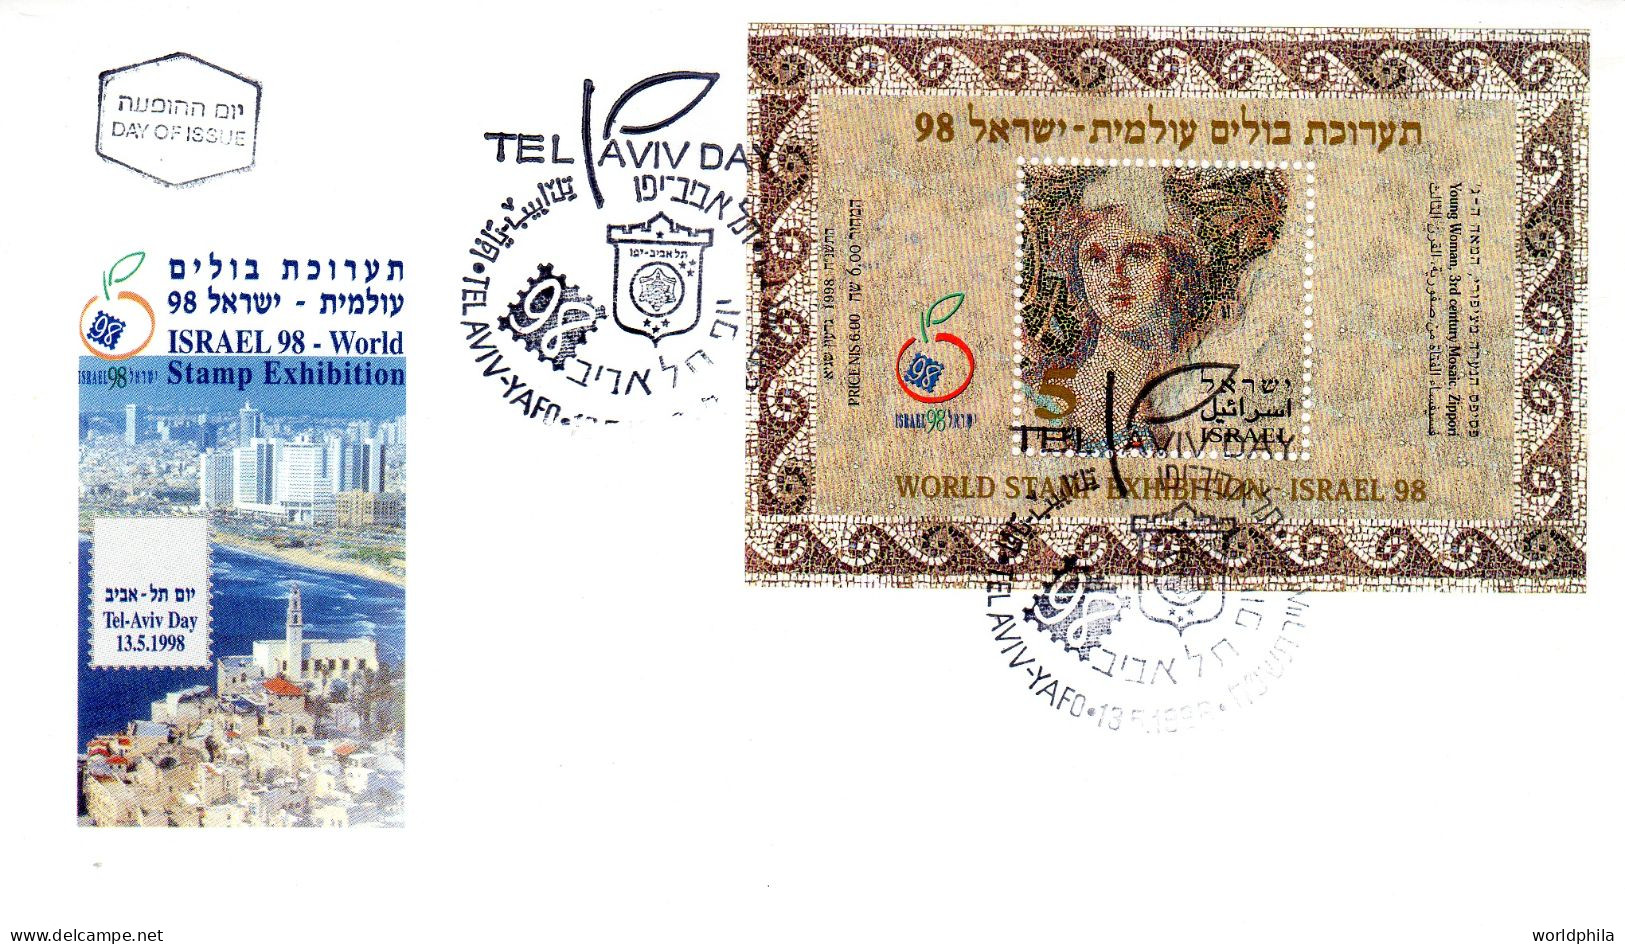 ISRAEL"World Stamp Exhibition 98" Cacheted FDC "Woman Mosaic" Souvenir Sheet - FDC